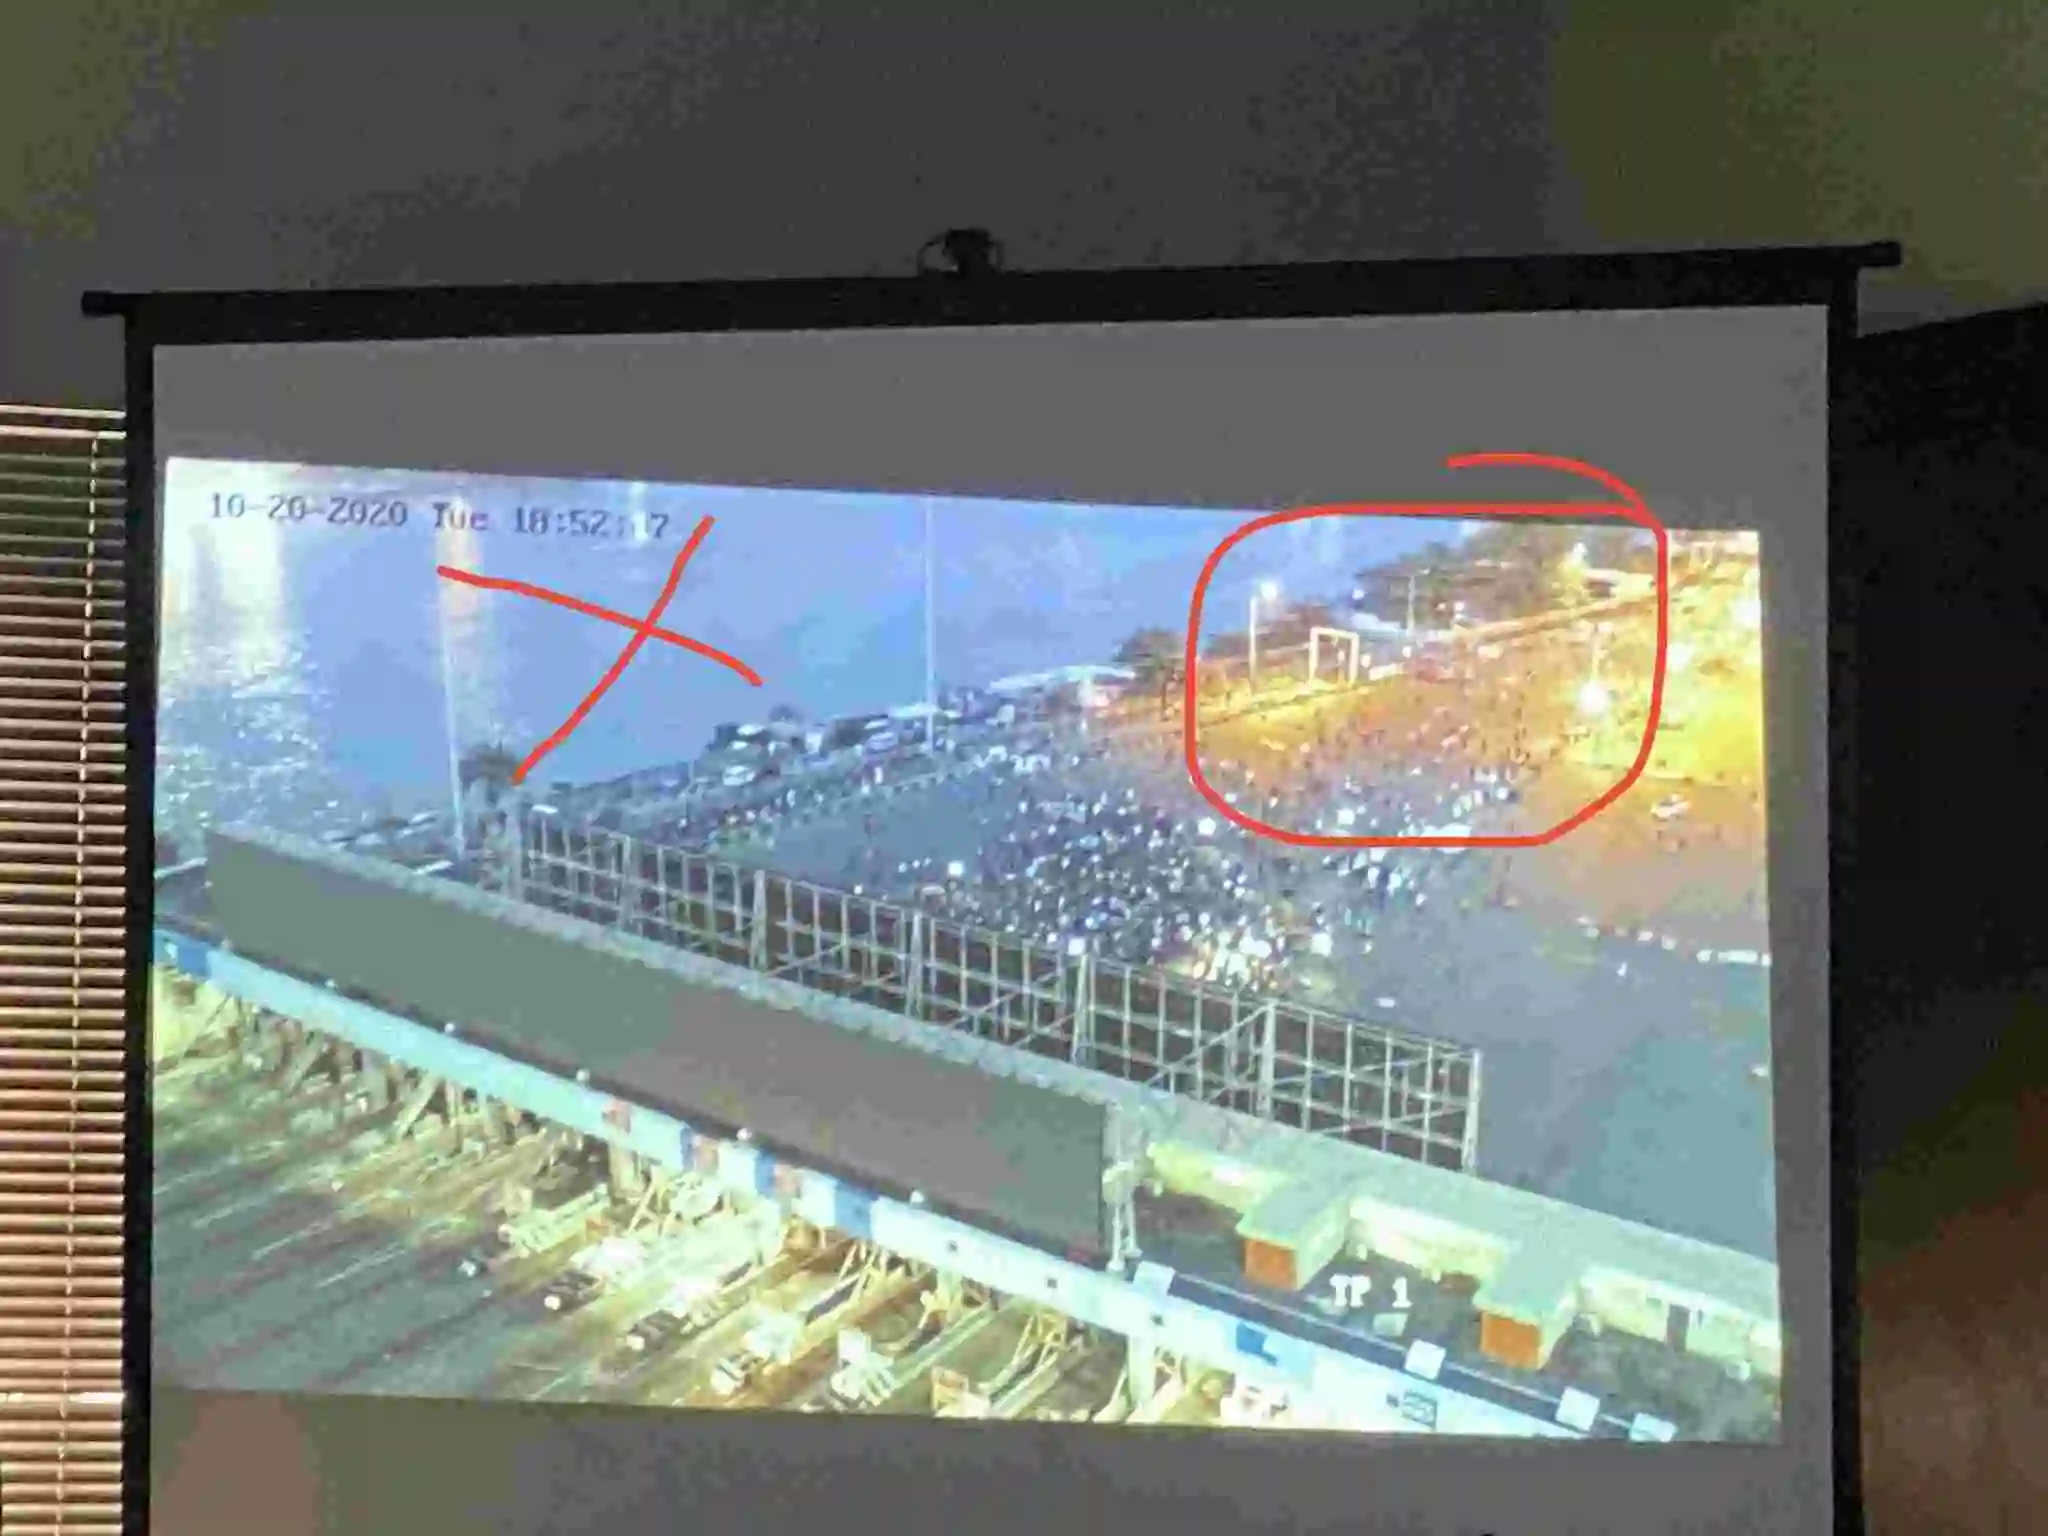 #EndSARS: Lagos Judicial panel continues to examine CCTV footage from Lekki tollgate on October 20